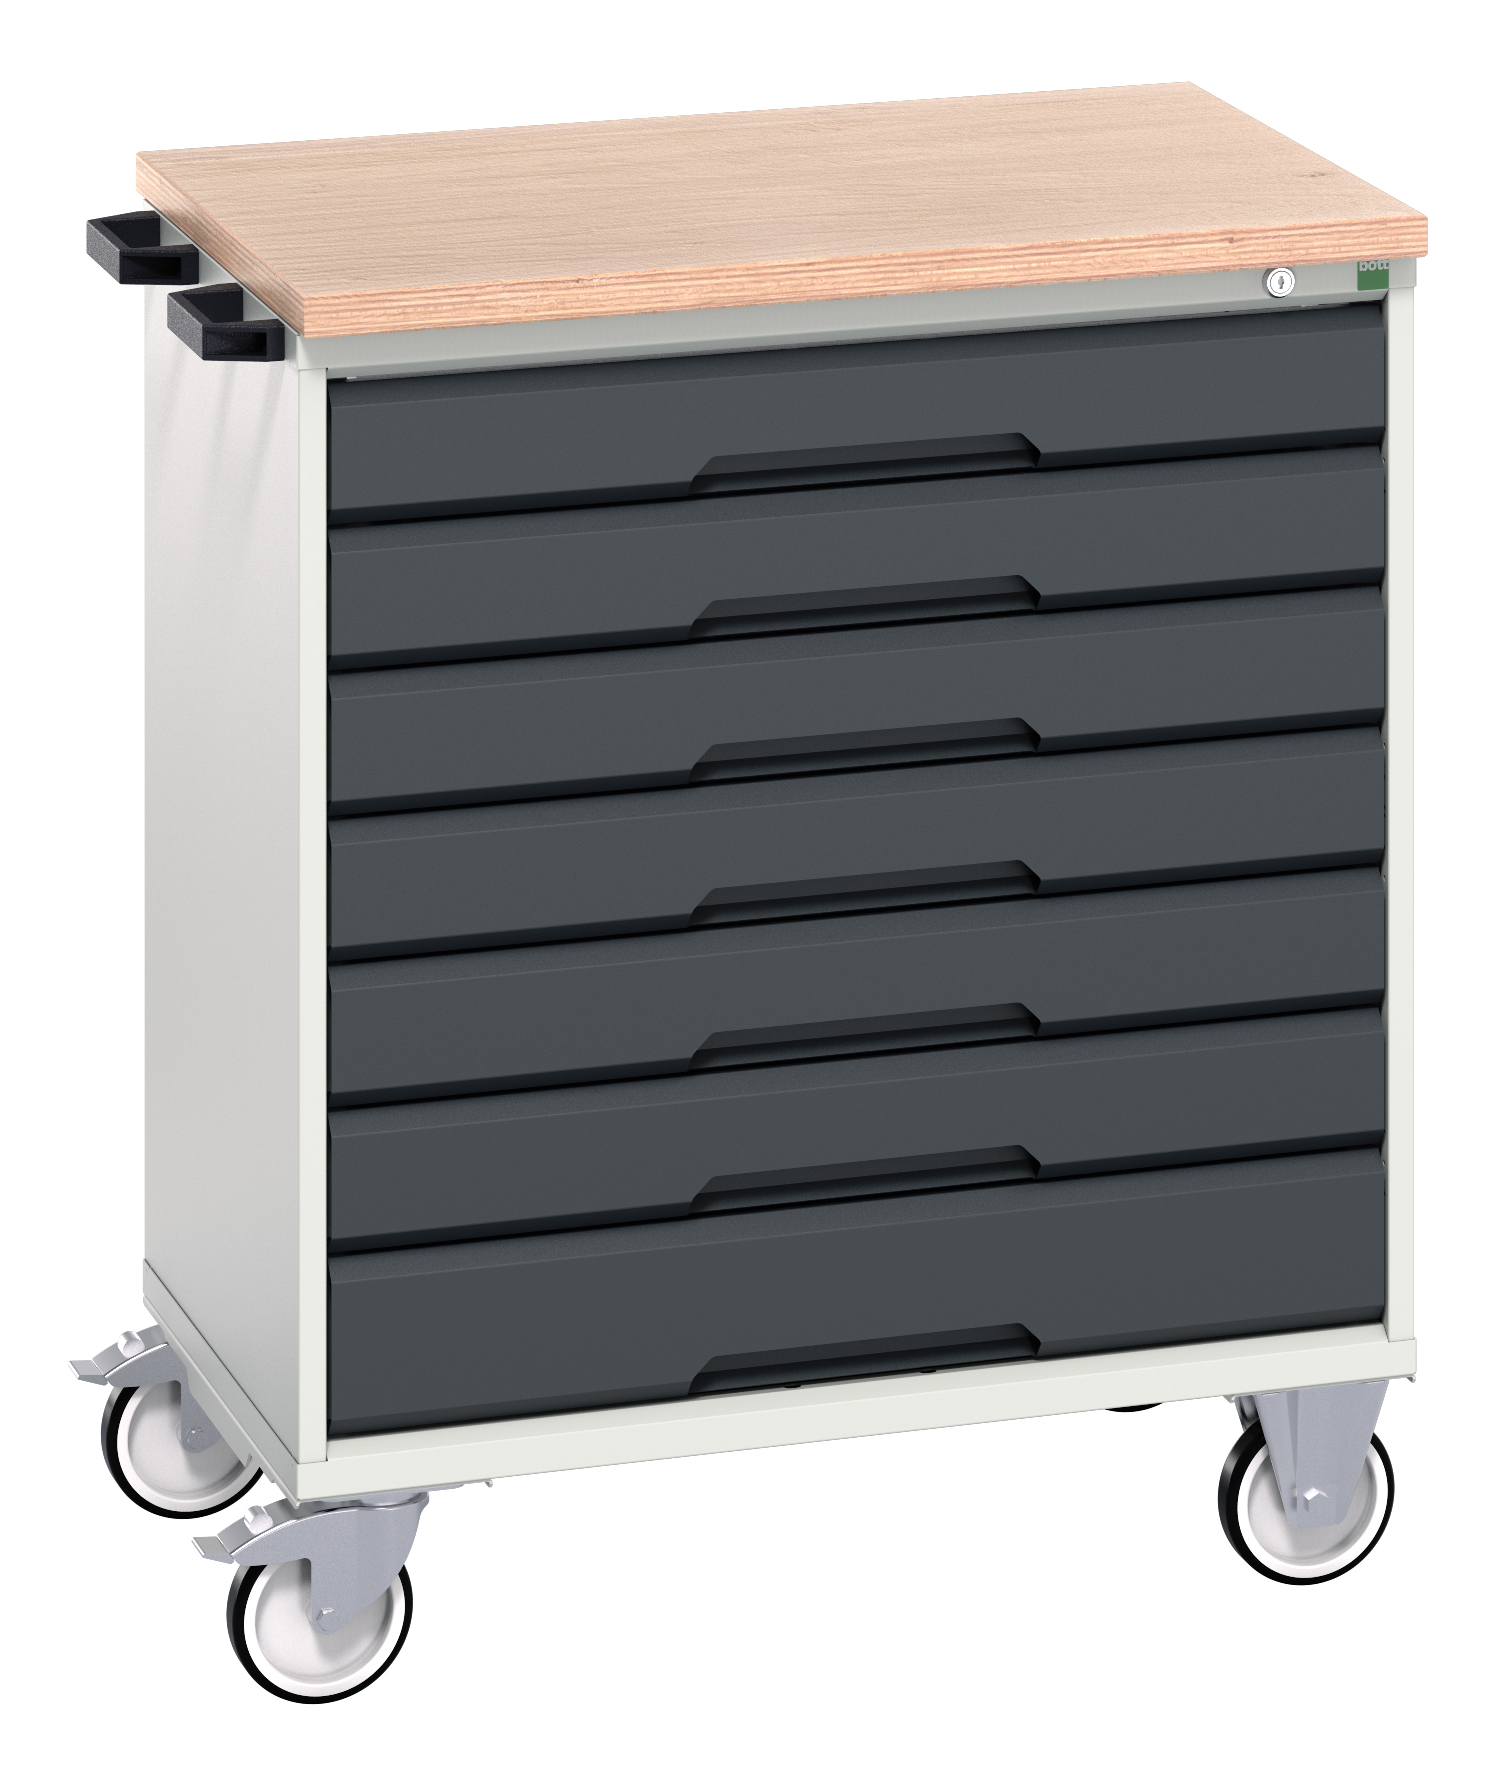 Bott Verso Mobile Drawer Cabinet With 7 Drawers & Multiplex Top - 16927007.19